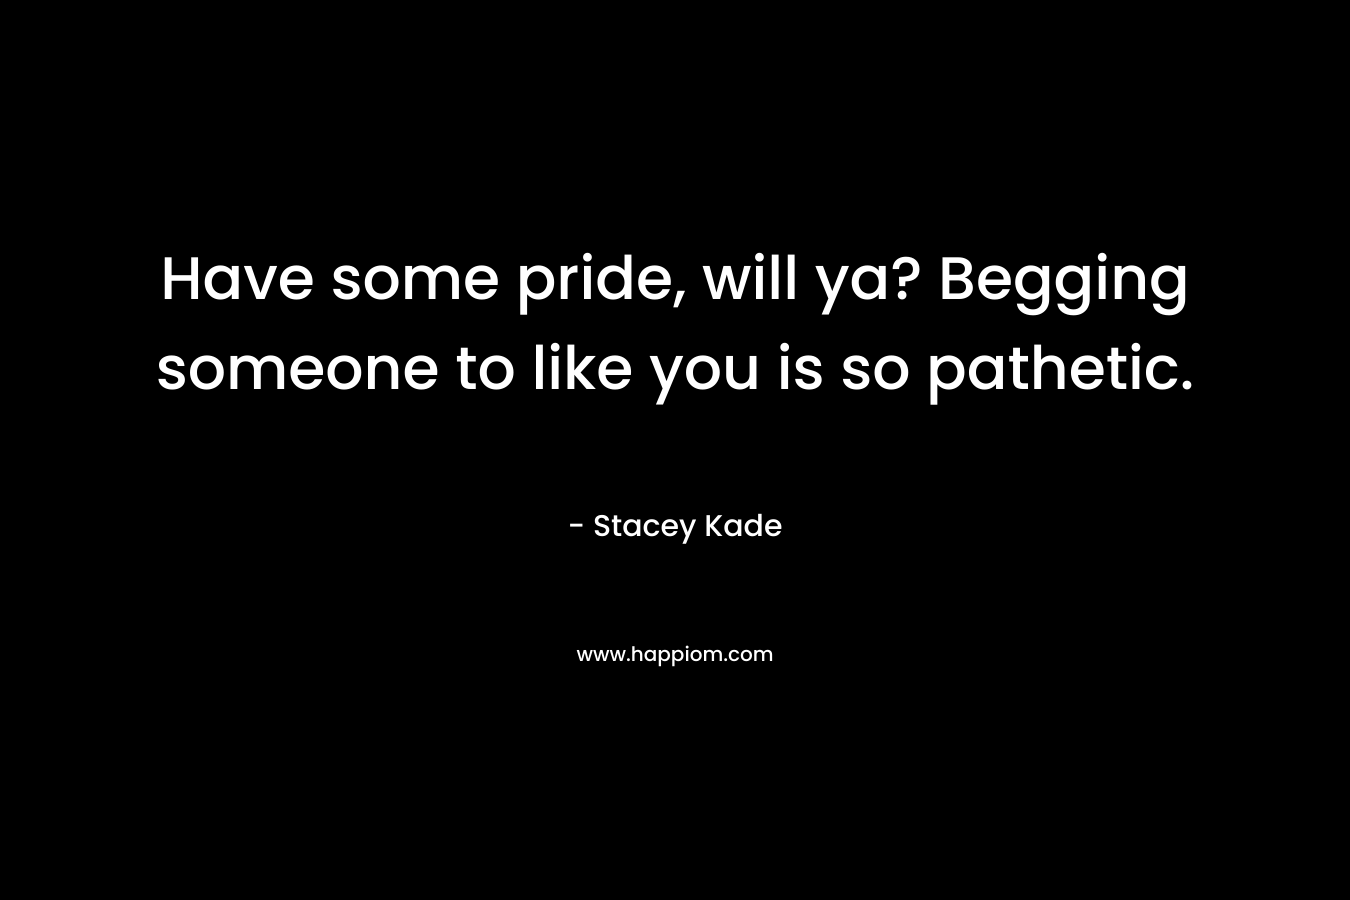 Have some pride, will ya? Begging someone to like you is so pathetic. – Stacey Kade